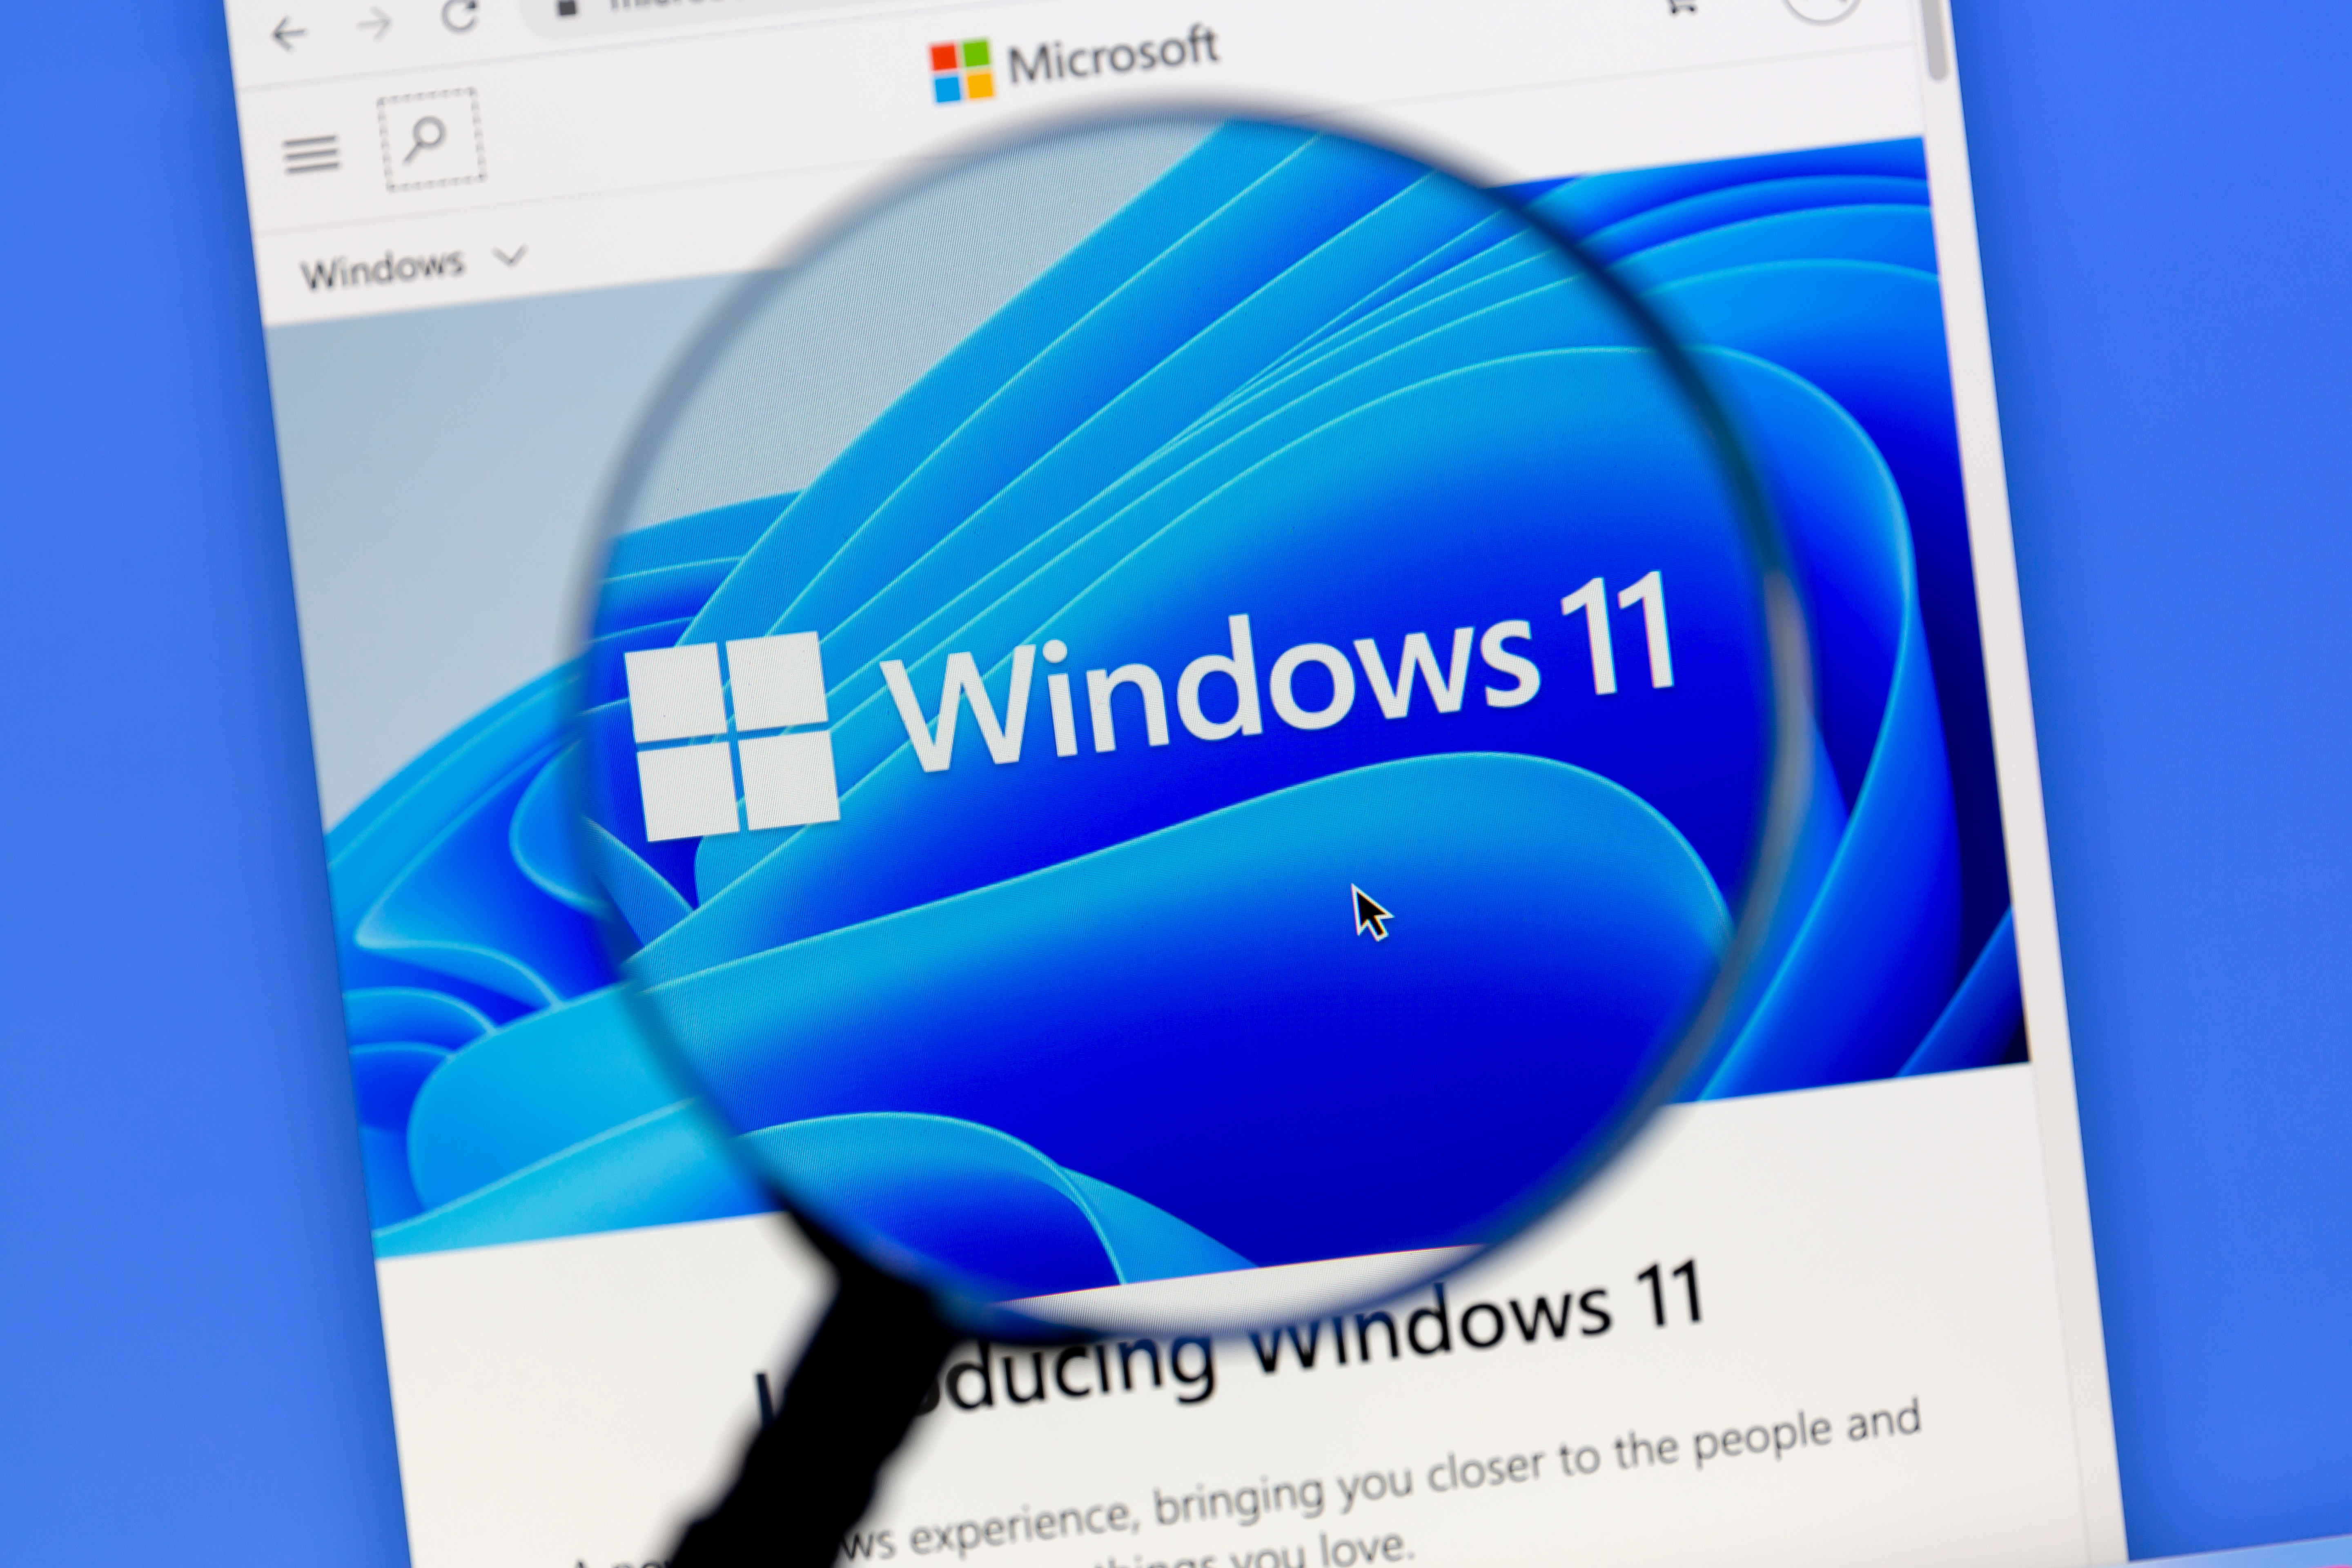 Featured image: Investigating the new Windows 11. - Read full post: Windows 11 Overview – The Latest and Greatest